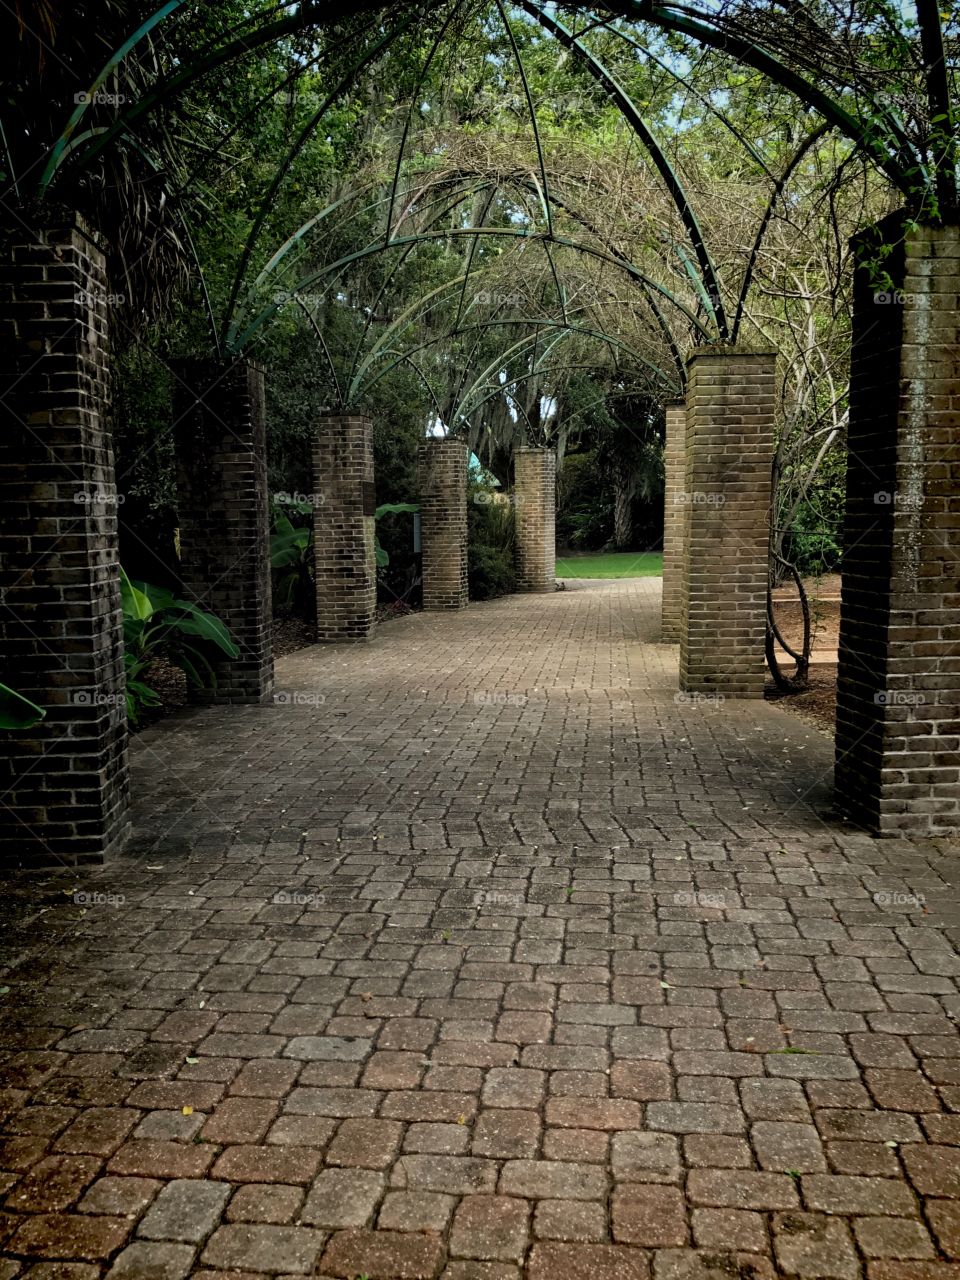 Brick walkway cover with vines park day 